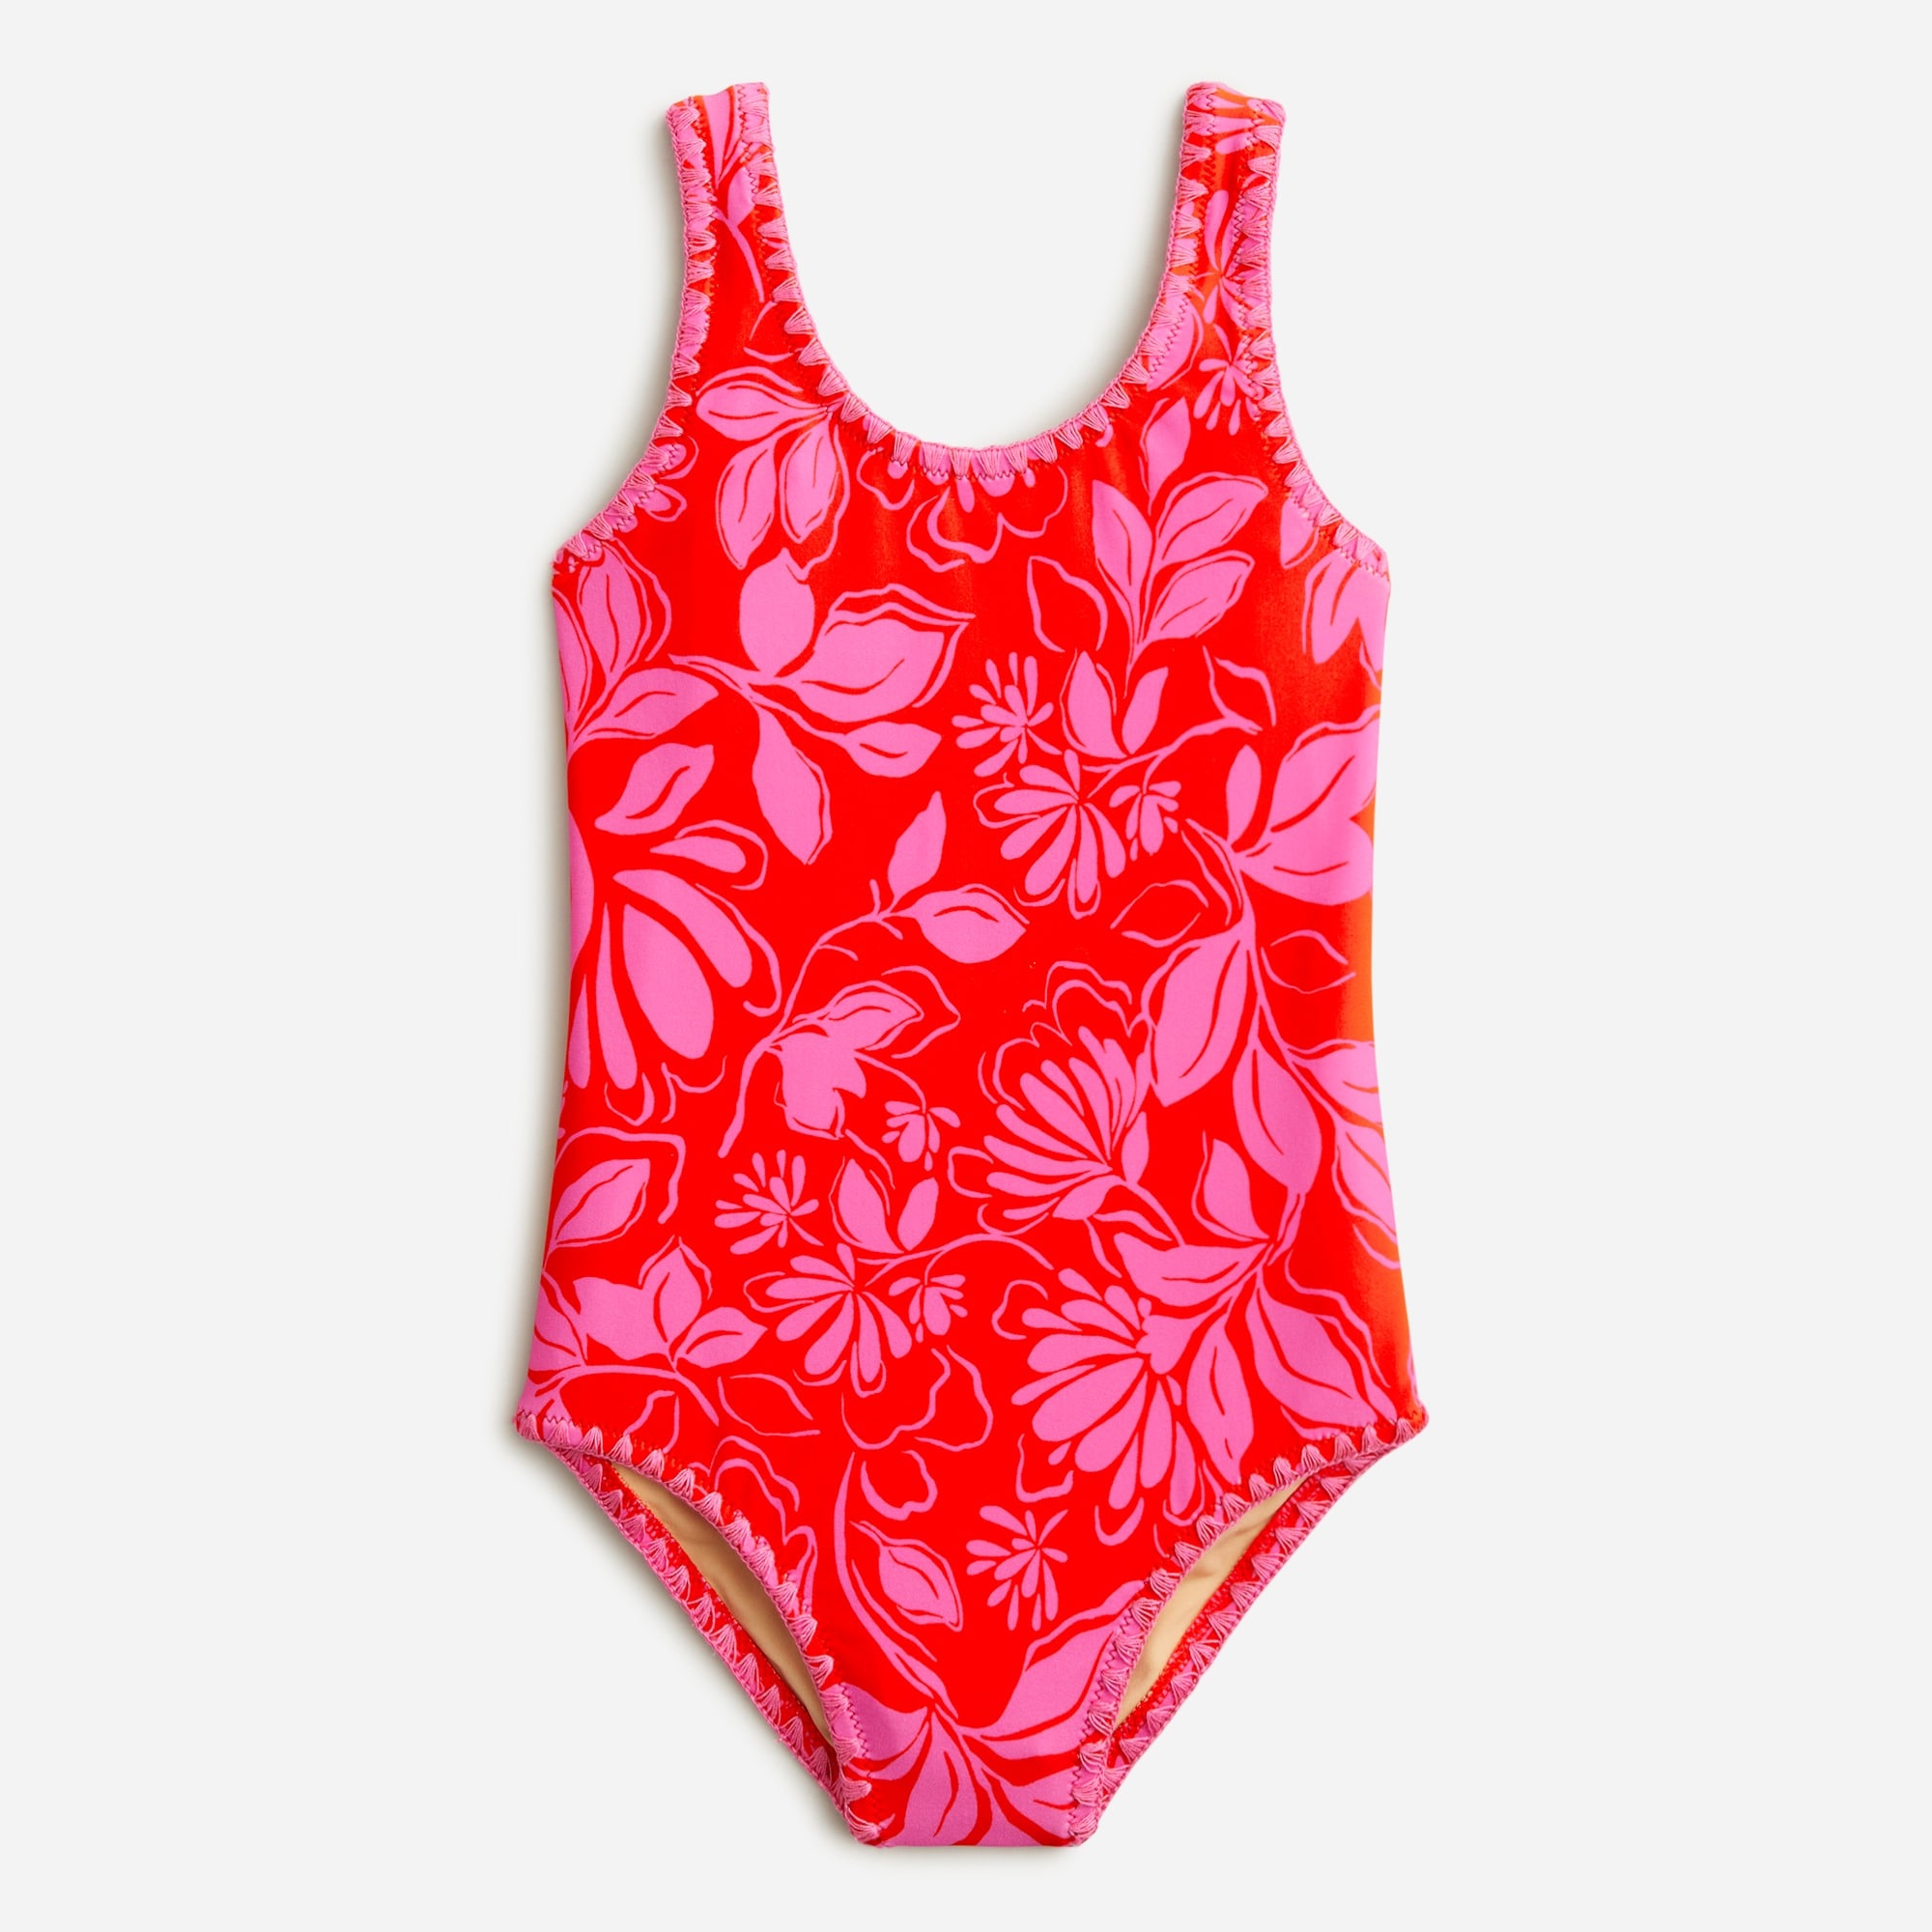 girls Girls' stitched one-piece swimsuit with UPF 50+